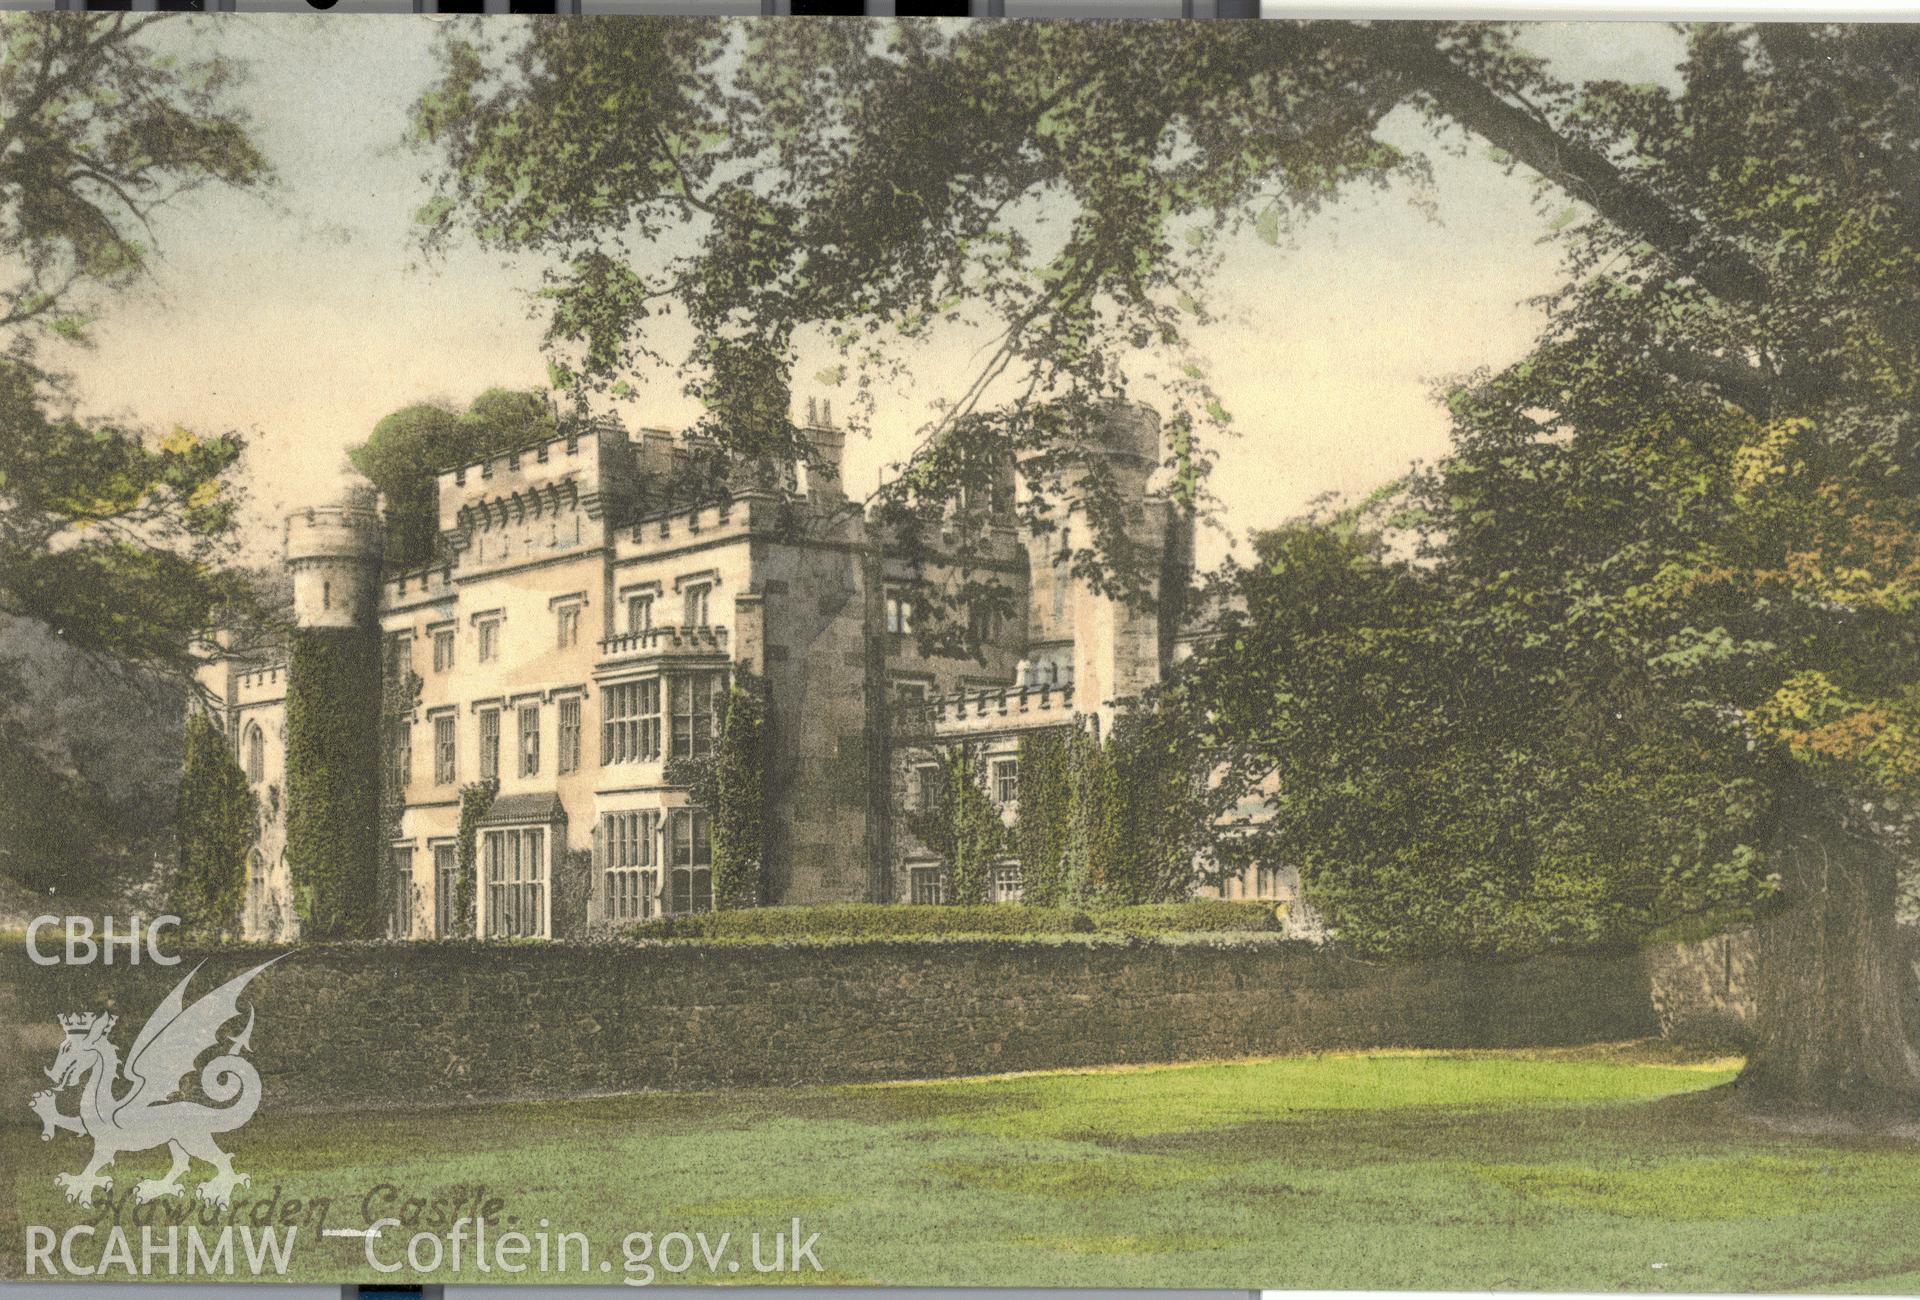 Digitised postcard image of Hawarden Castle, F. Frith & Co Ltd Reigate. Produced by Parks and Gardens Data Services, from an original item in the Peter Davis Collection at Parks and Gardens UK. We hold only web-resolution images of this collection, suitable for viewing on screen and for research purposes only. We do not hold the original images, or publication quality scans.